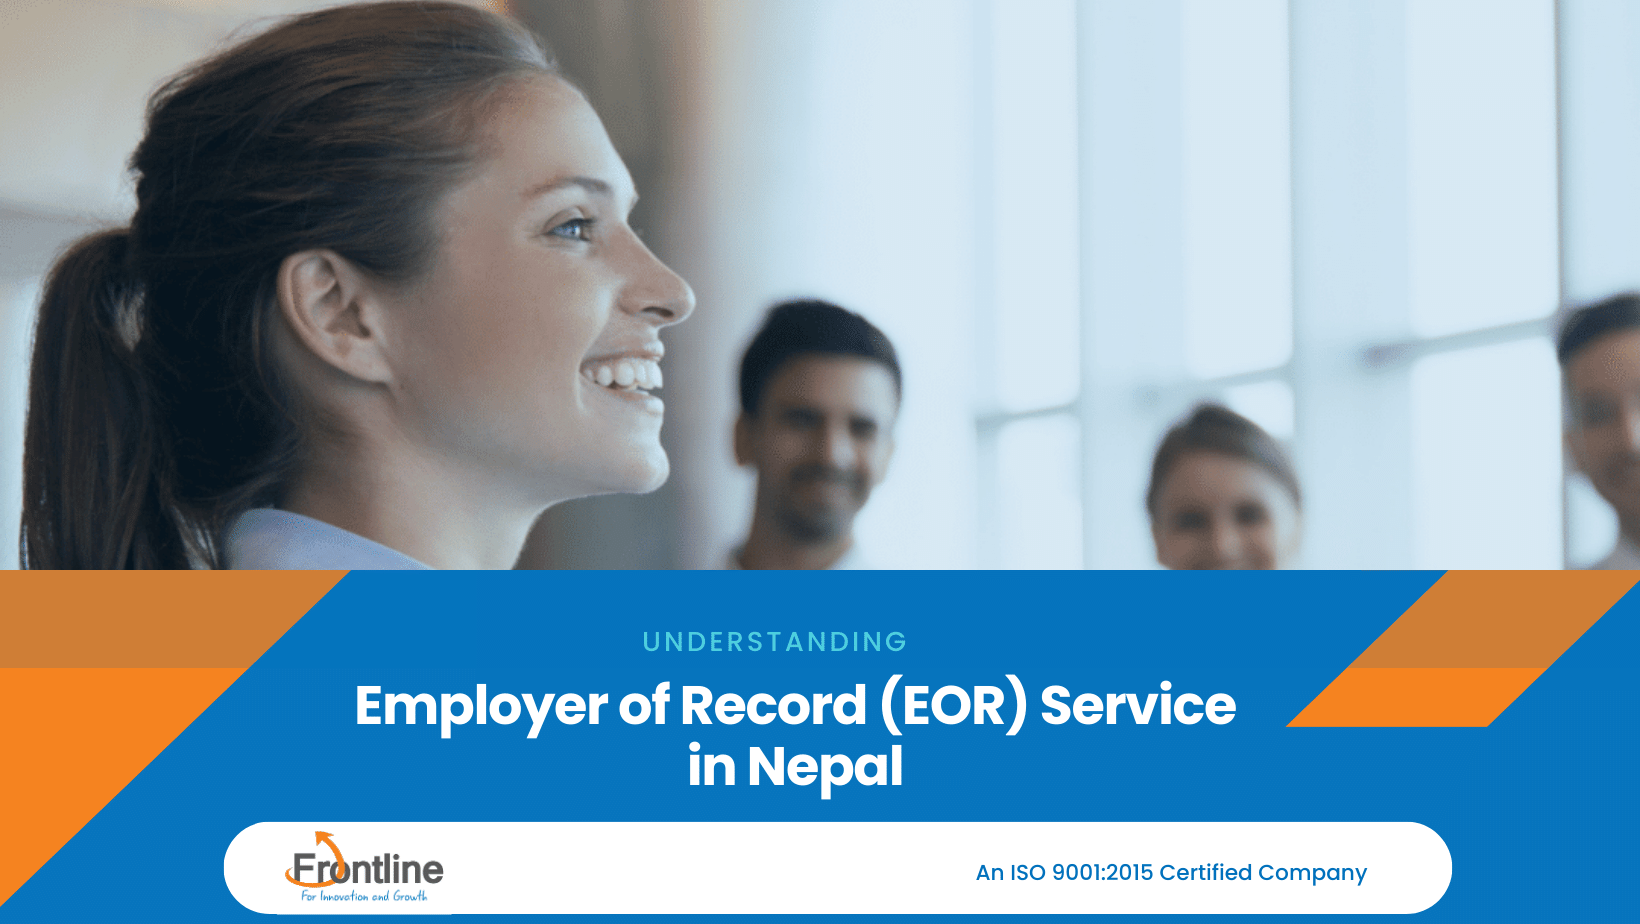 Employer of Record Services (EOR) in Nepal